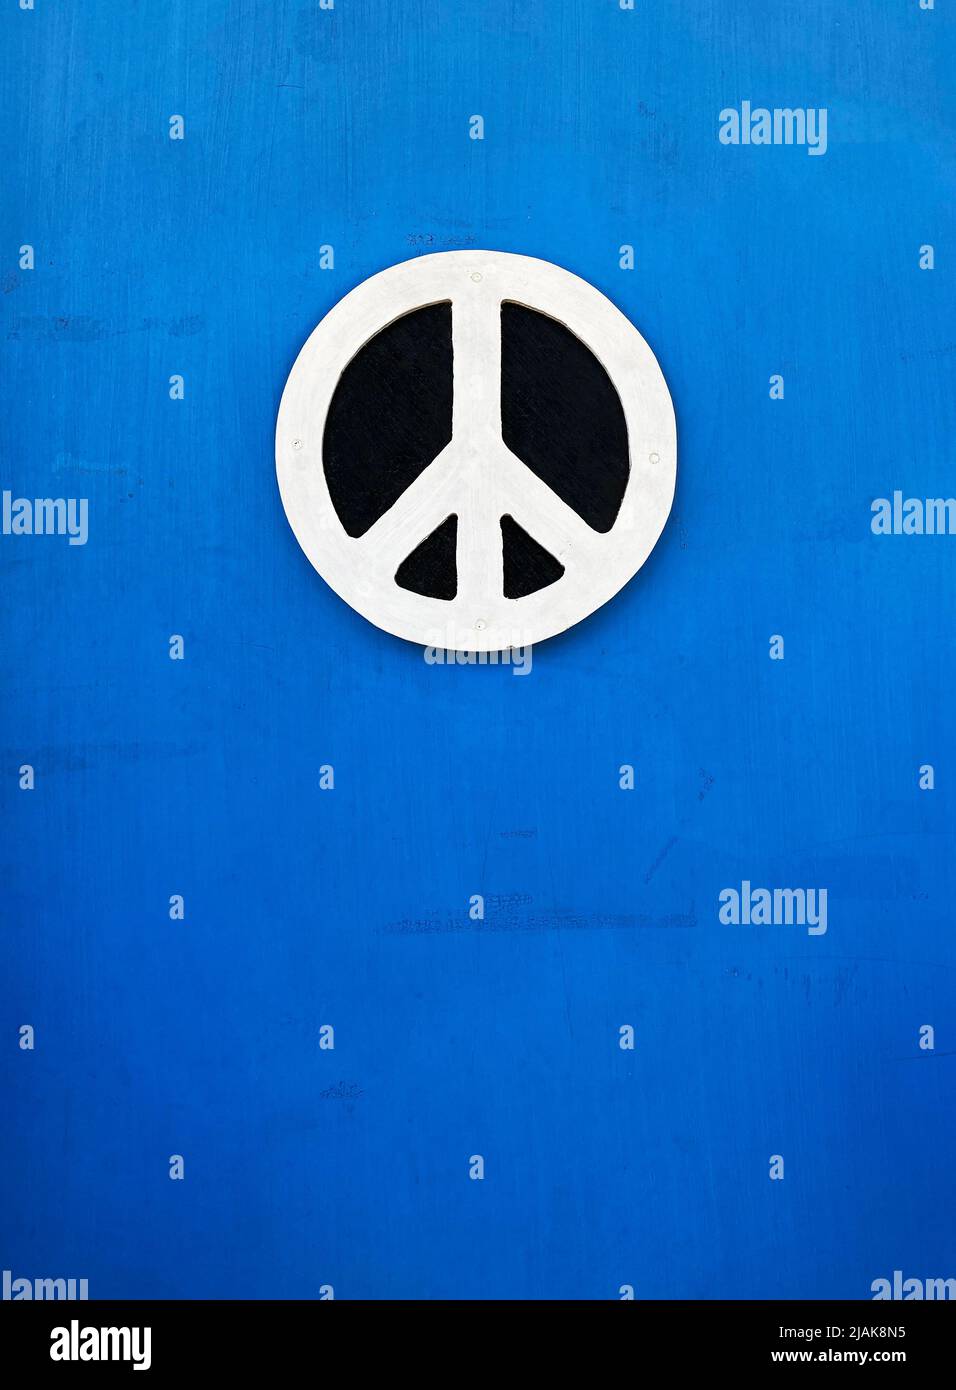 A carved peace sign on a blue background Stock Photo